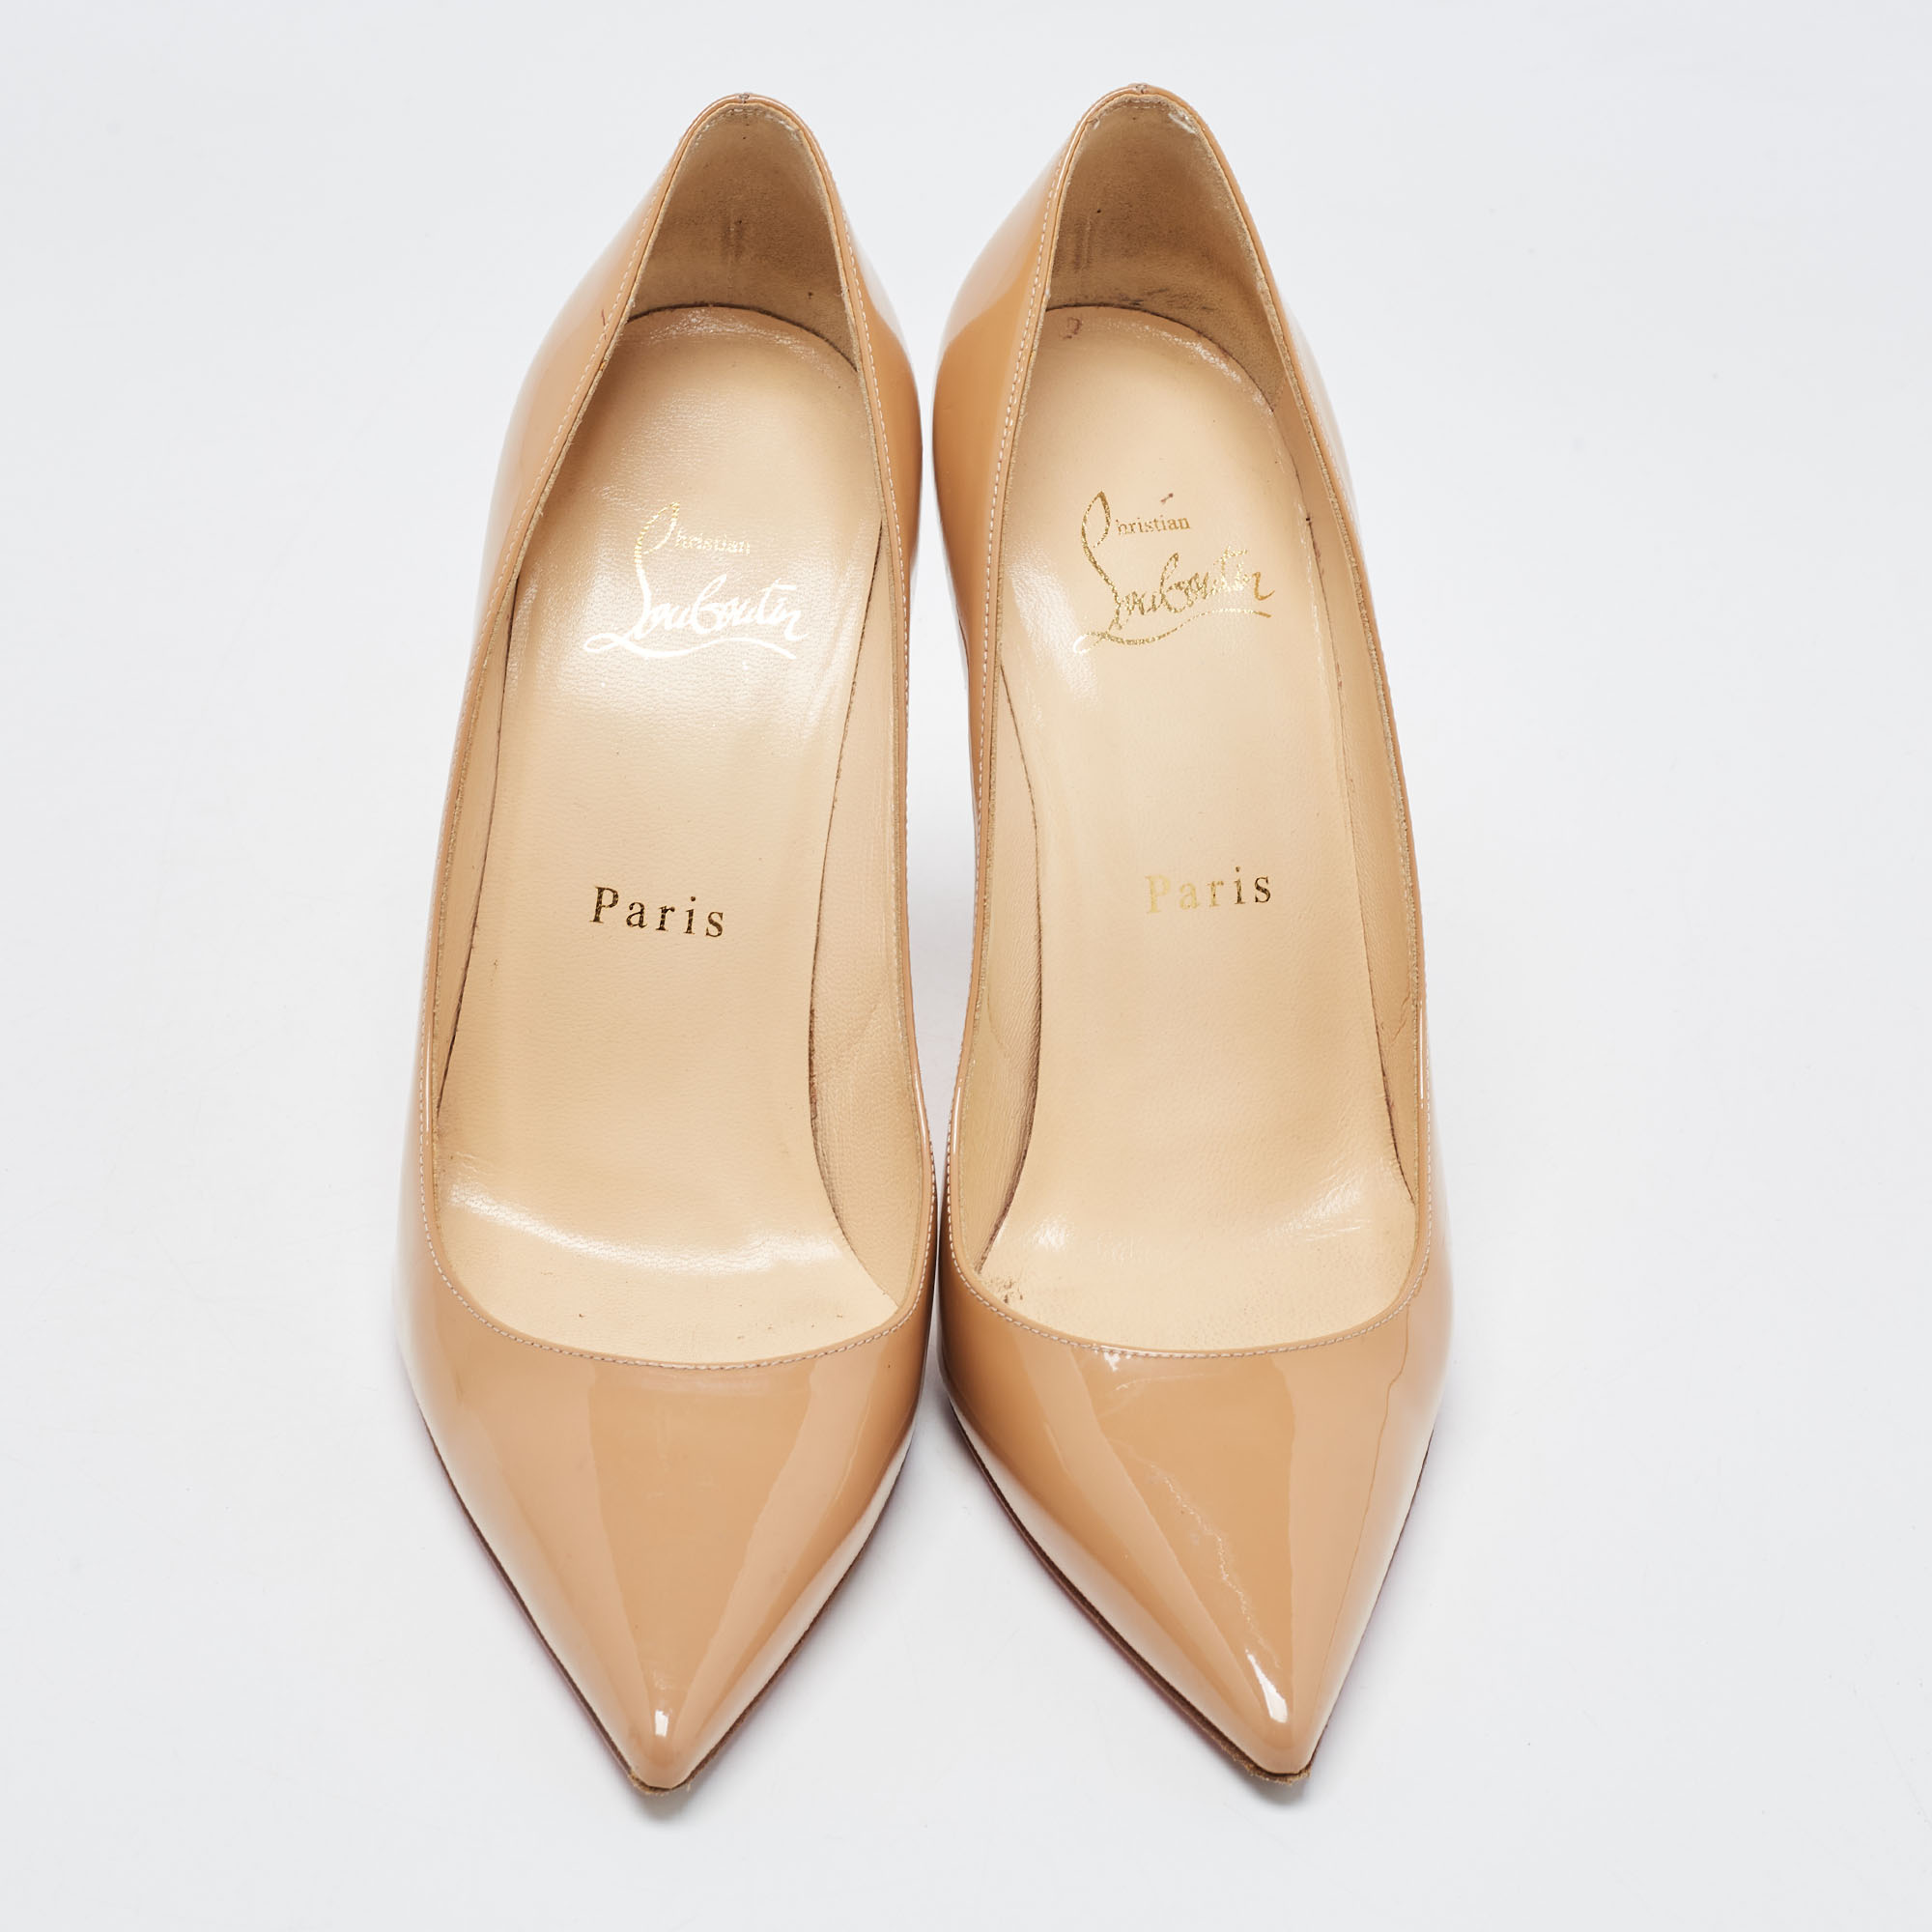 Christian Louboutin Beige Patent Leather Kate Pumps Size 37